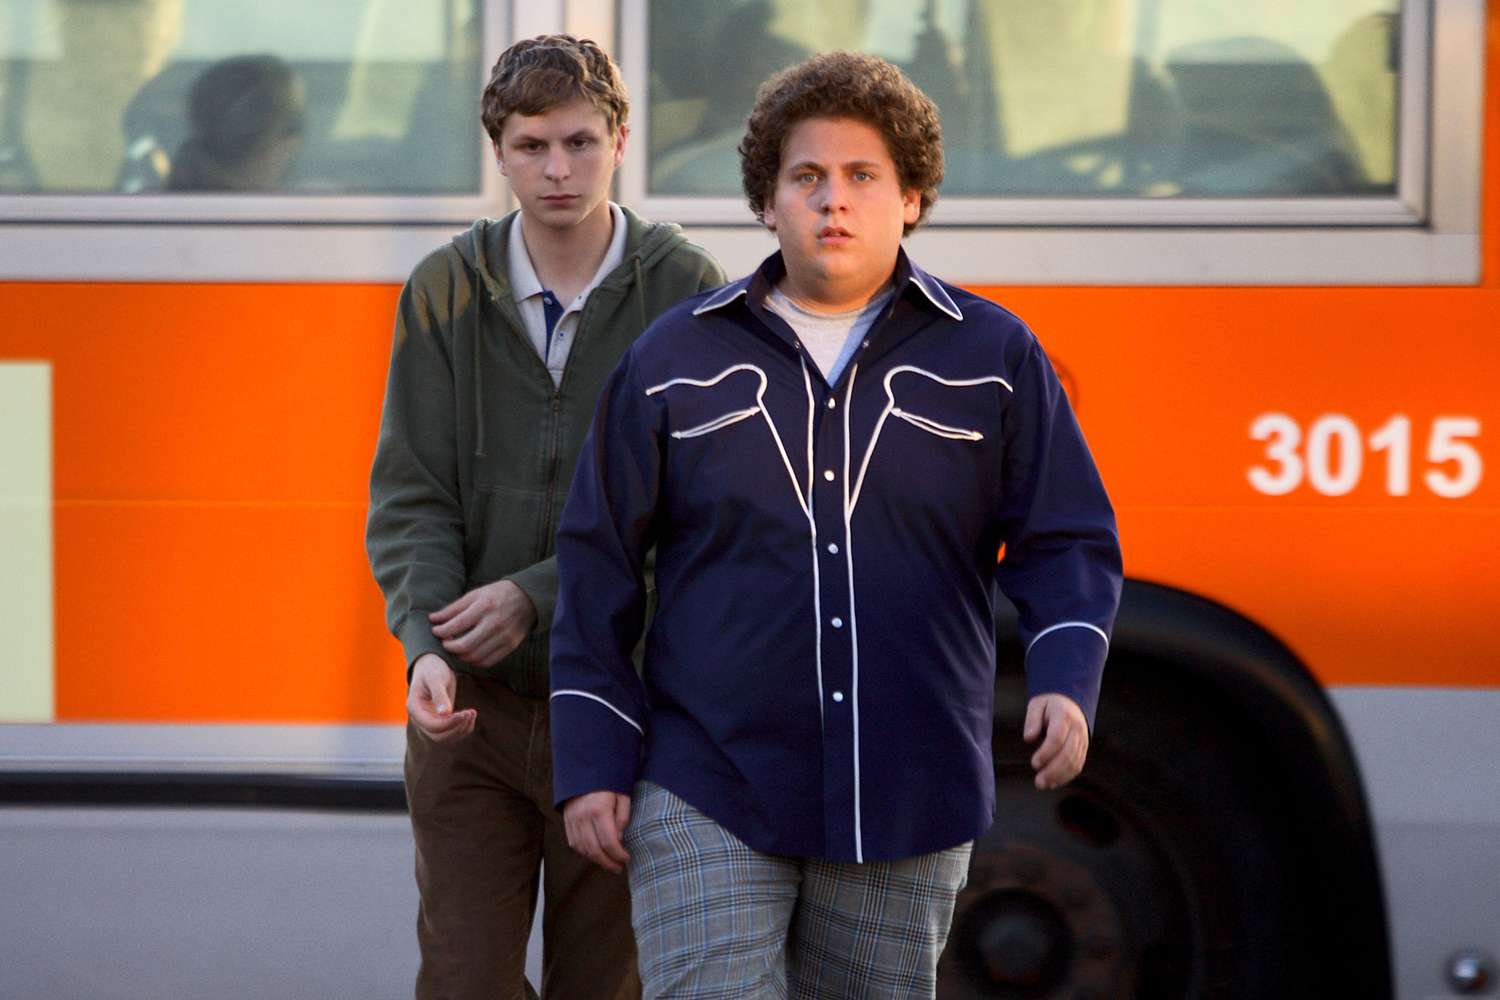 Michael Cera and Jonah Hill in Superbad